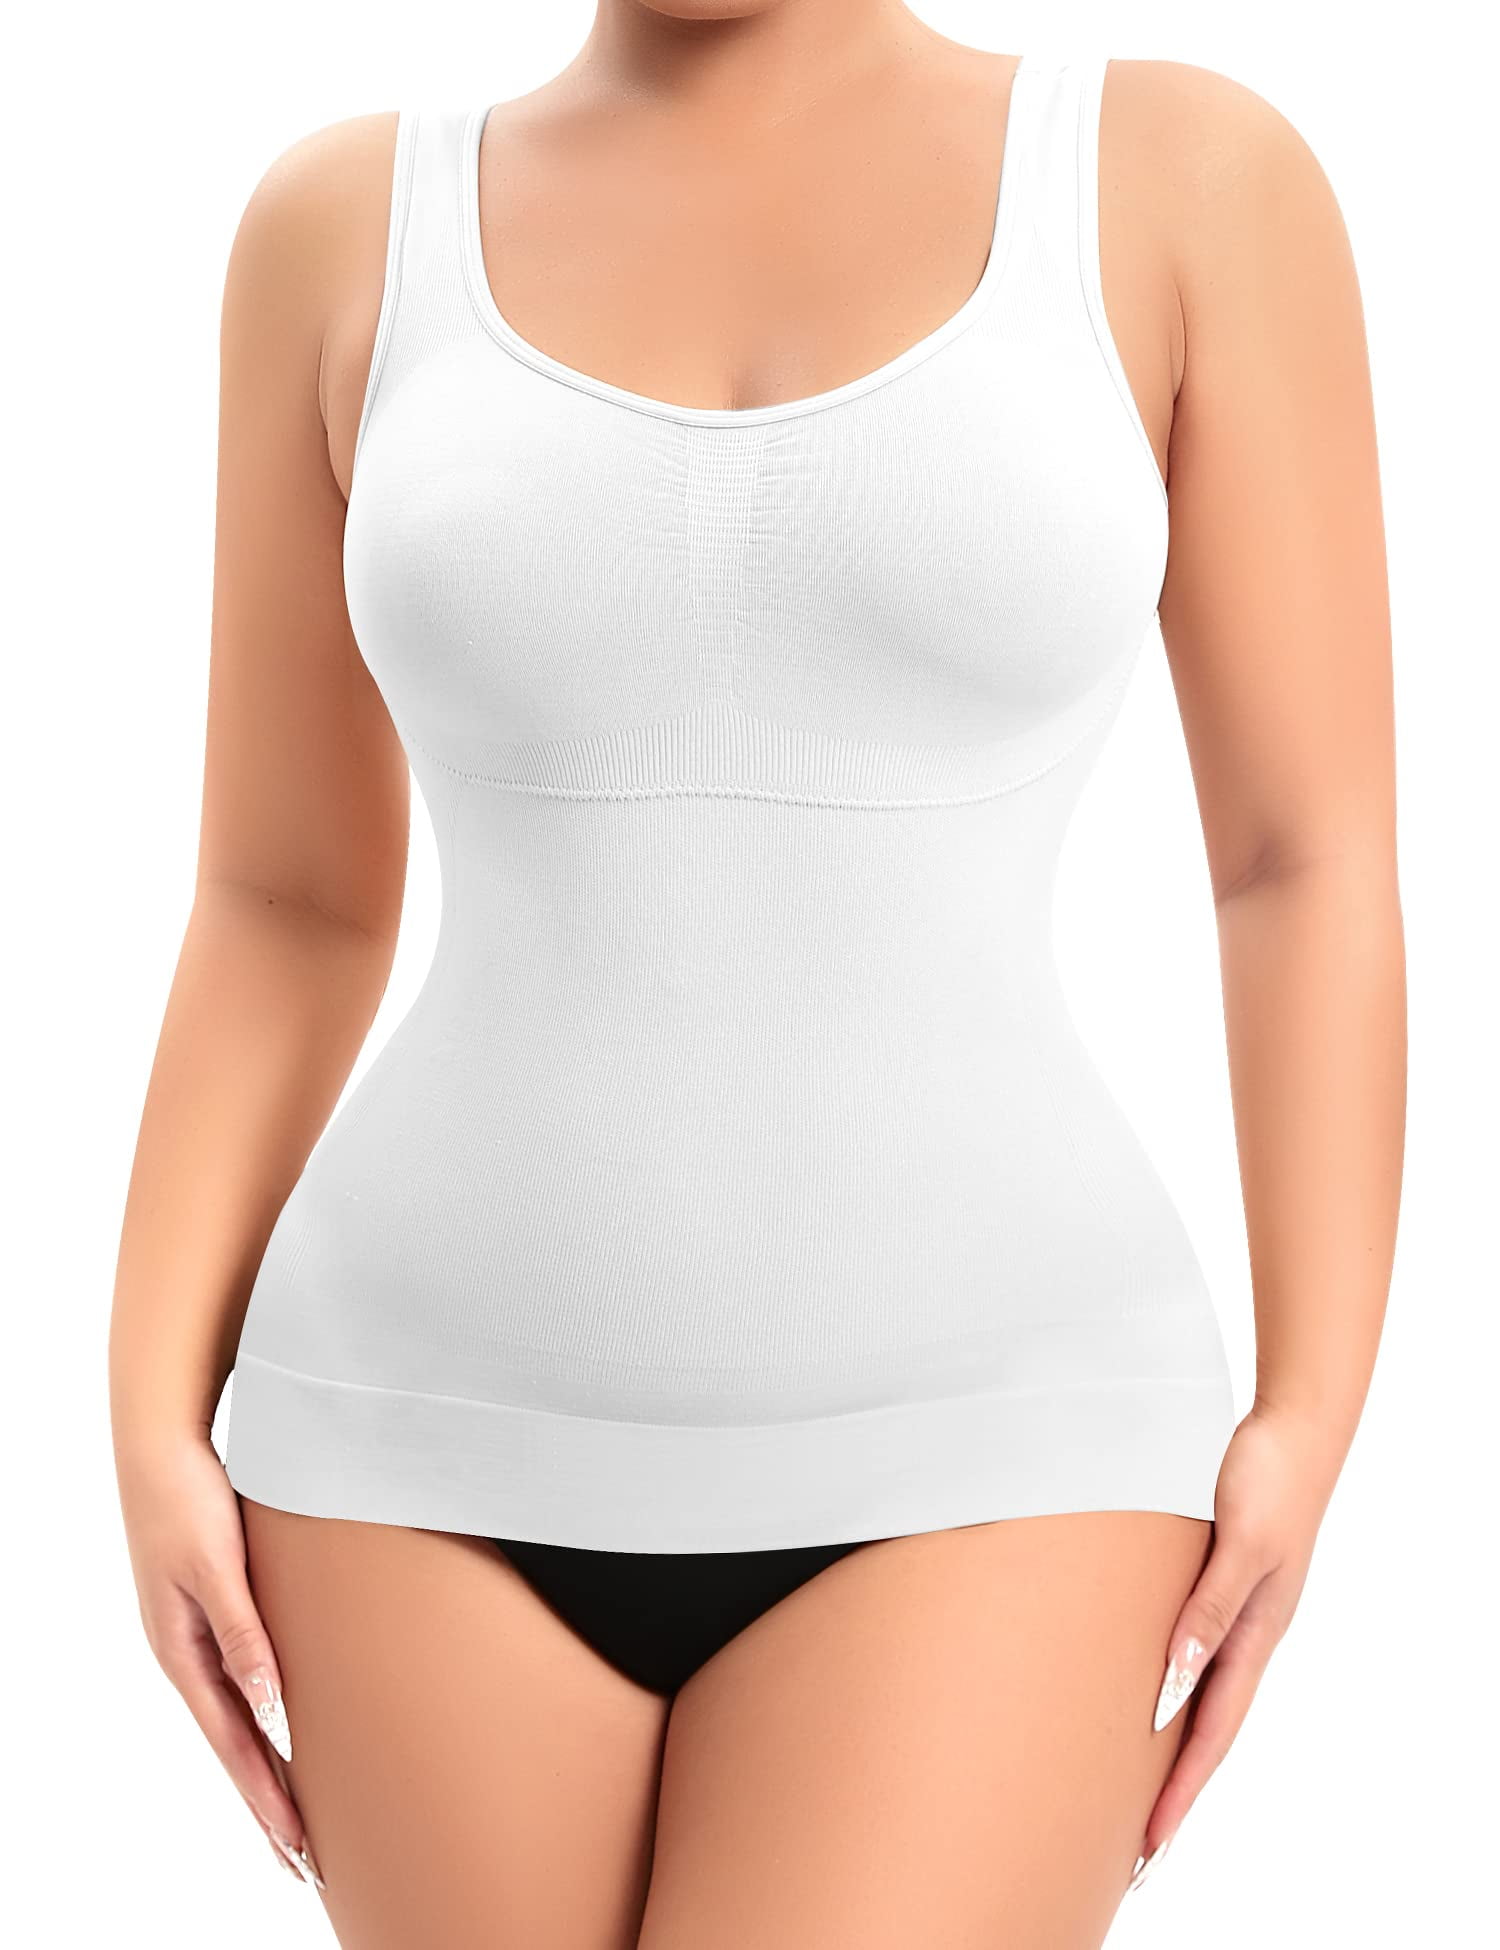 Lilvigor Tummy Control Camisole for Women Shapewear Tank Tops with